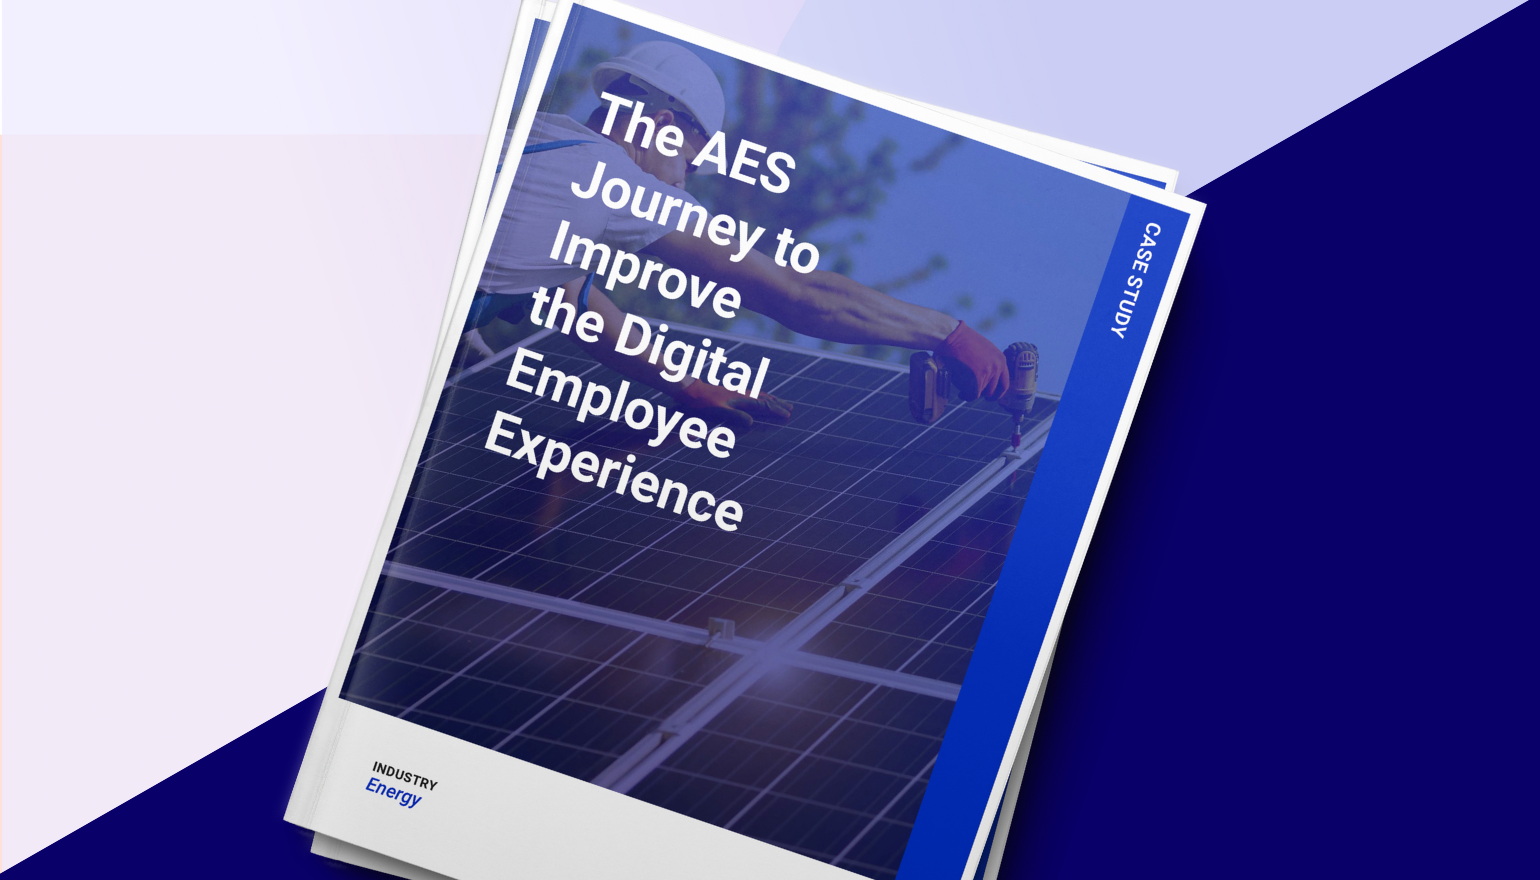 Case study on how the AES corporation improved the digital employee experience with the help of the Workgrid Digital Assistant